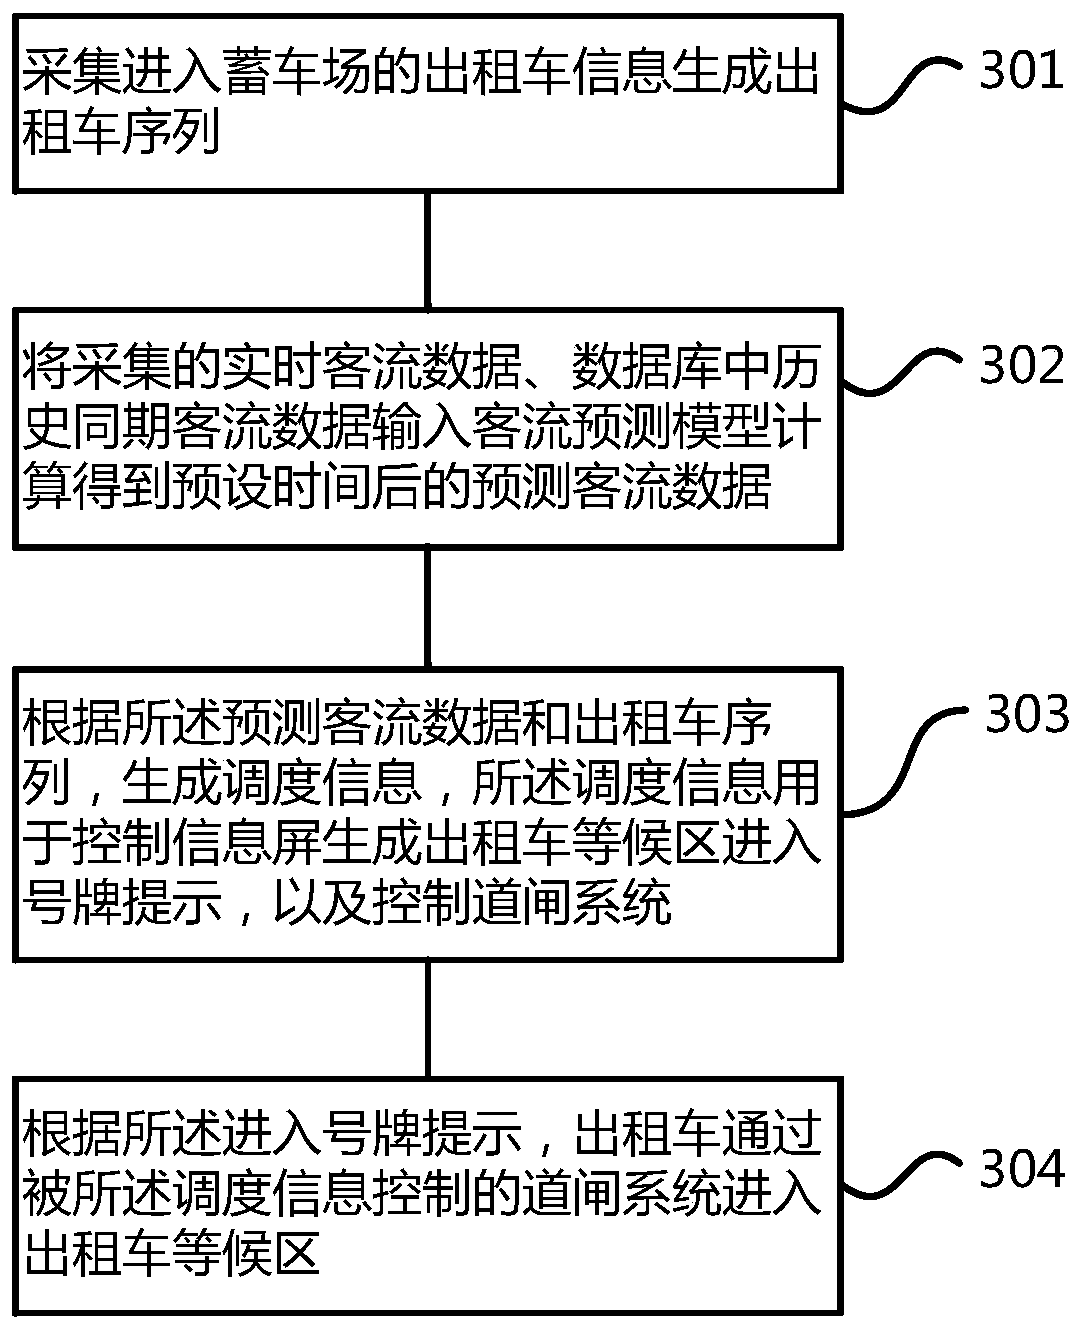 Airport taxi automatic scheduling method and device based on real-time passenger flow prediction